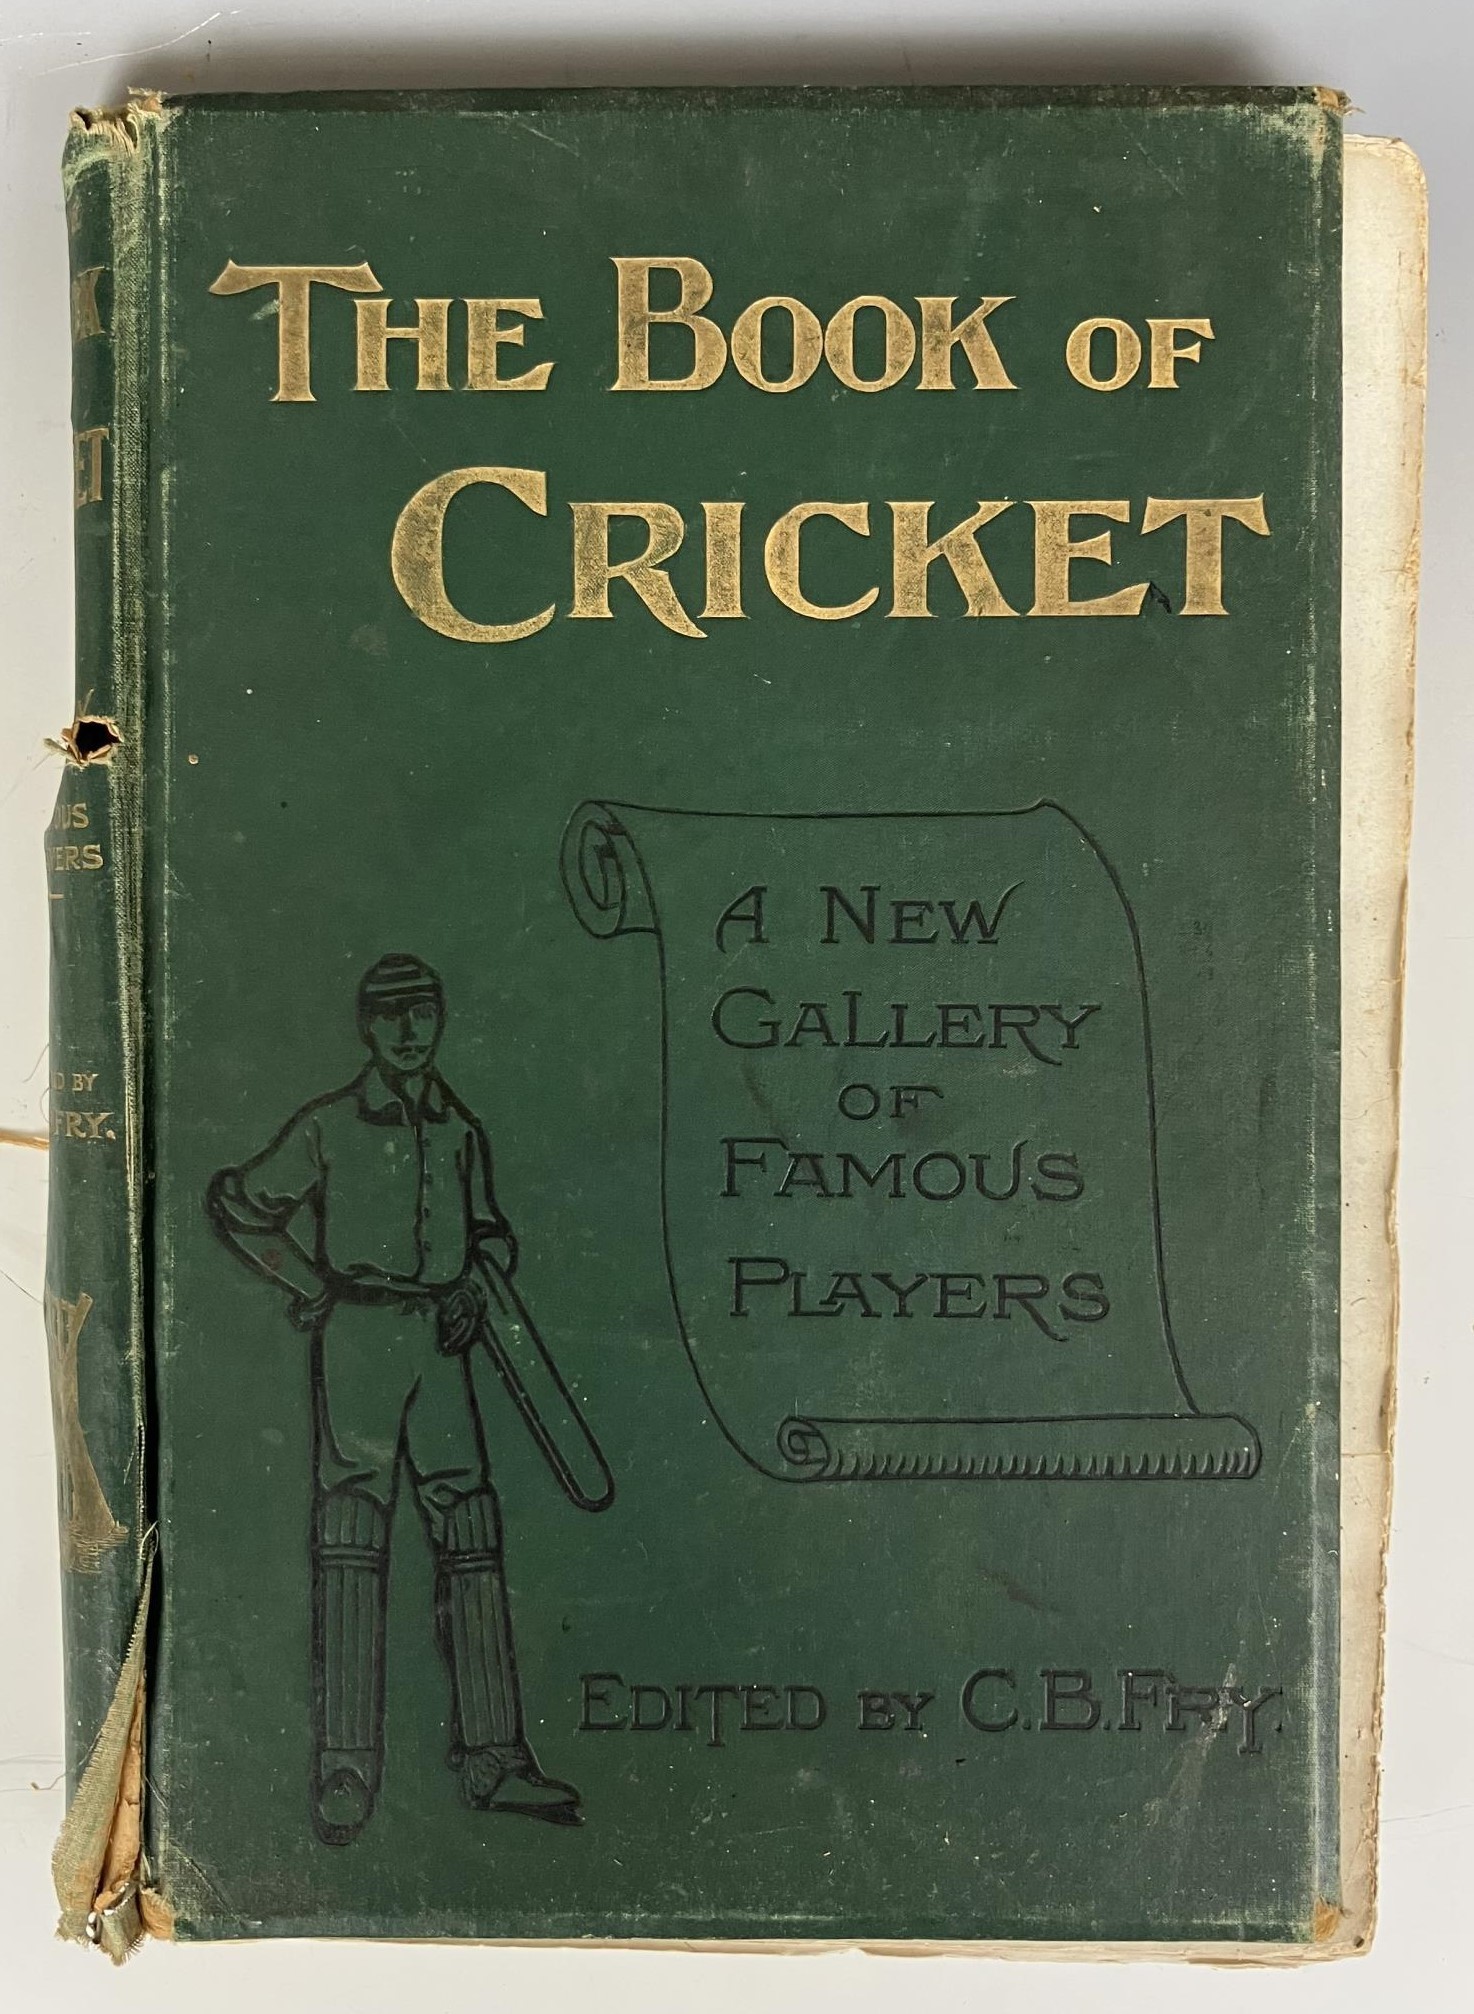 Cricket Of Today Illustrated, 2 vols., The Book Of Cricket, and Famous Cricketers, assorted sporting - Image 3 of 12